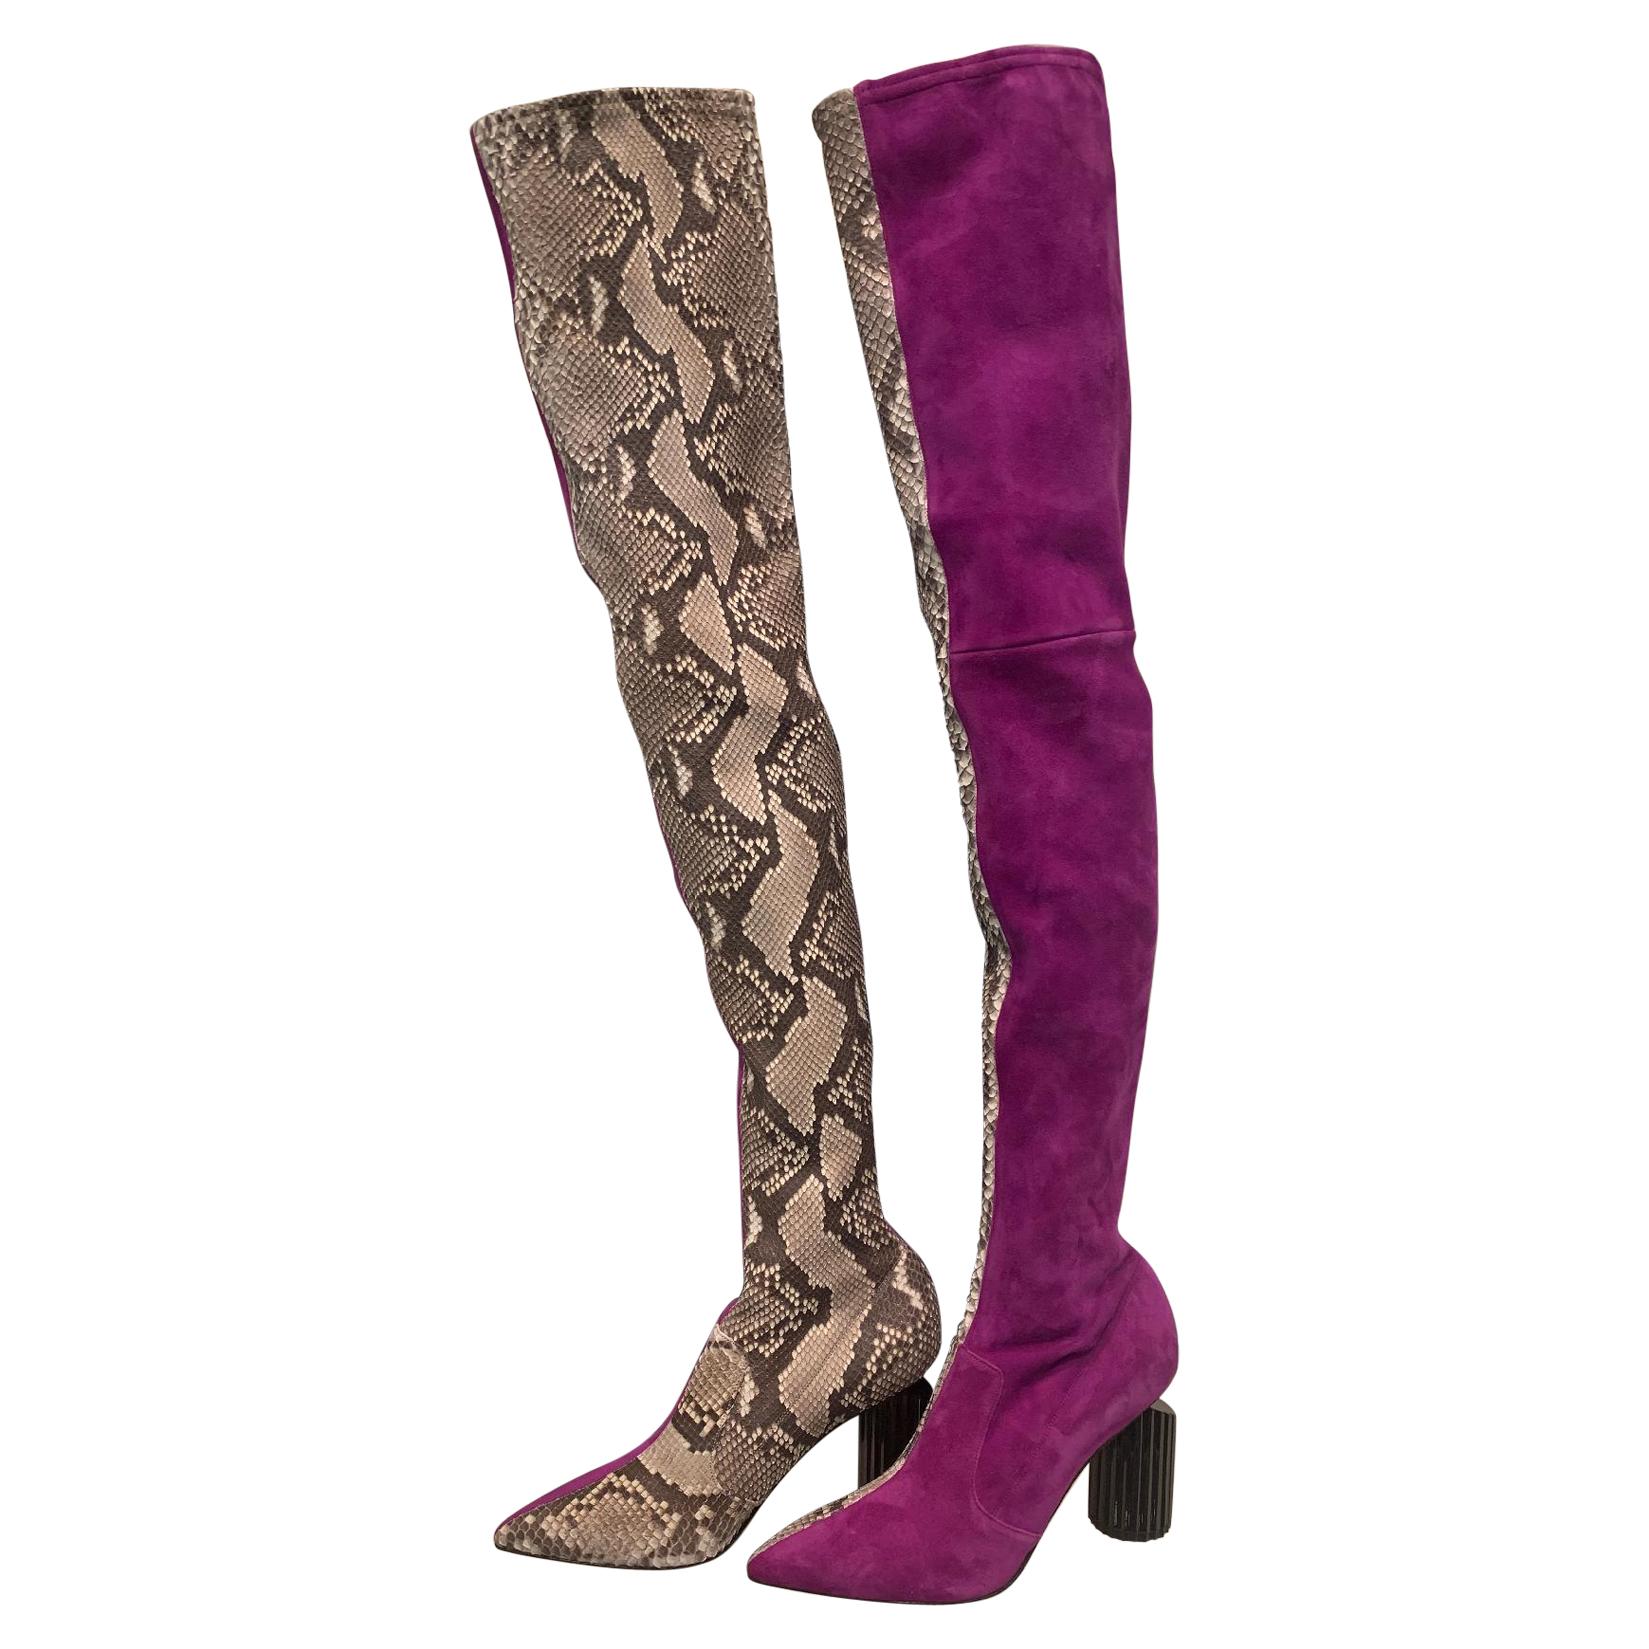 Avant Garde Roberto Cavalli Magenta Suede Two Tone Thigh High Boots Size 41